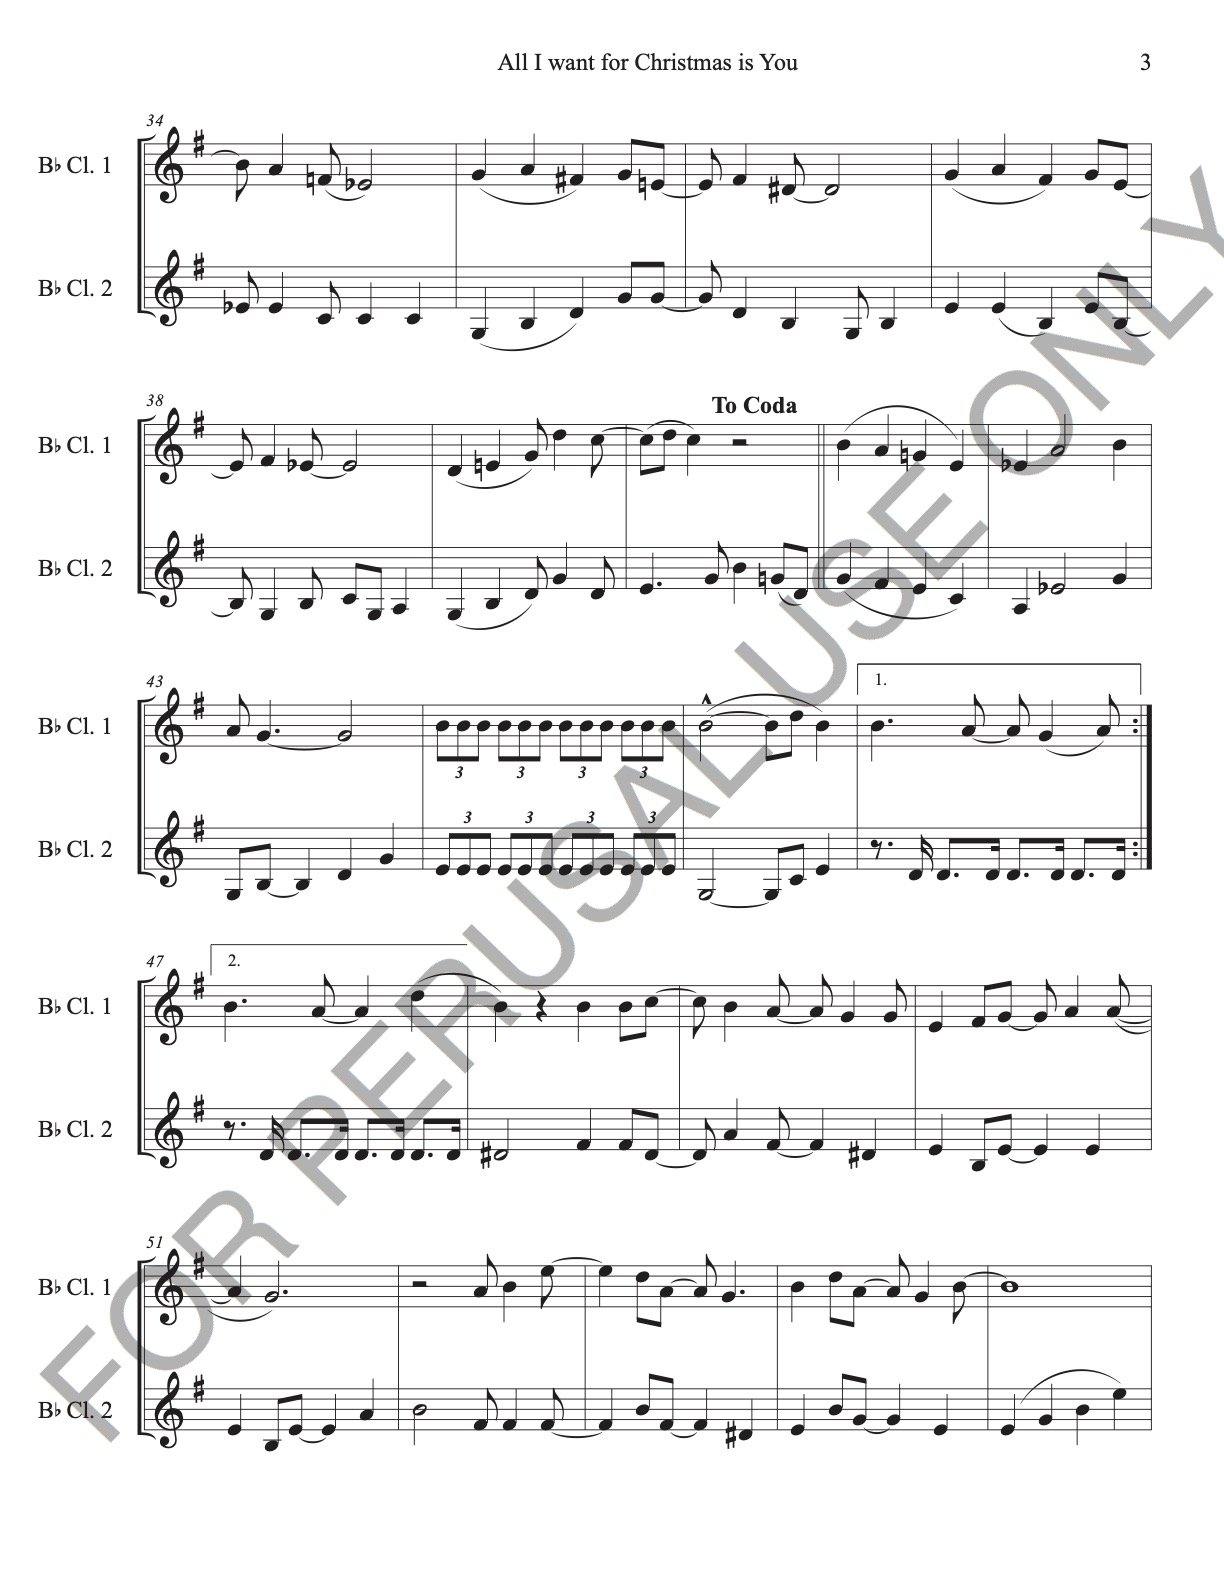 Clarinet Duet sheet music: All I want for Christmas is You - ChaipruckMekara